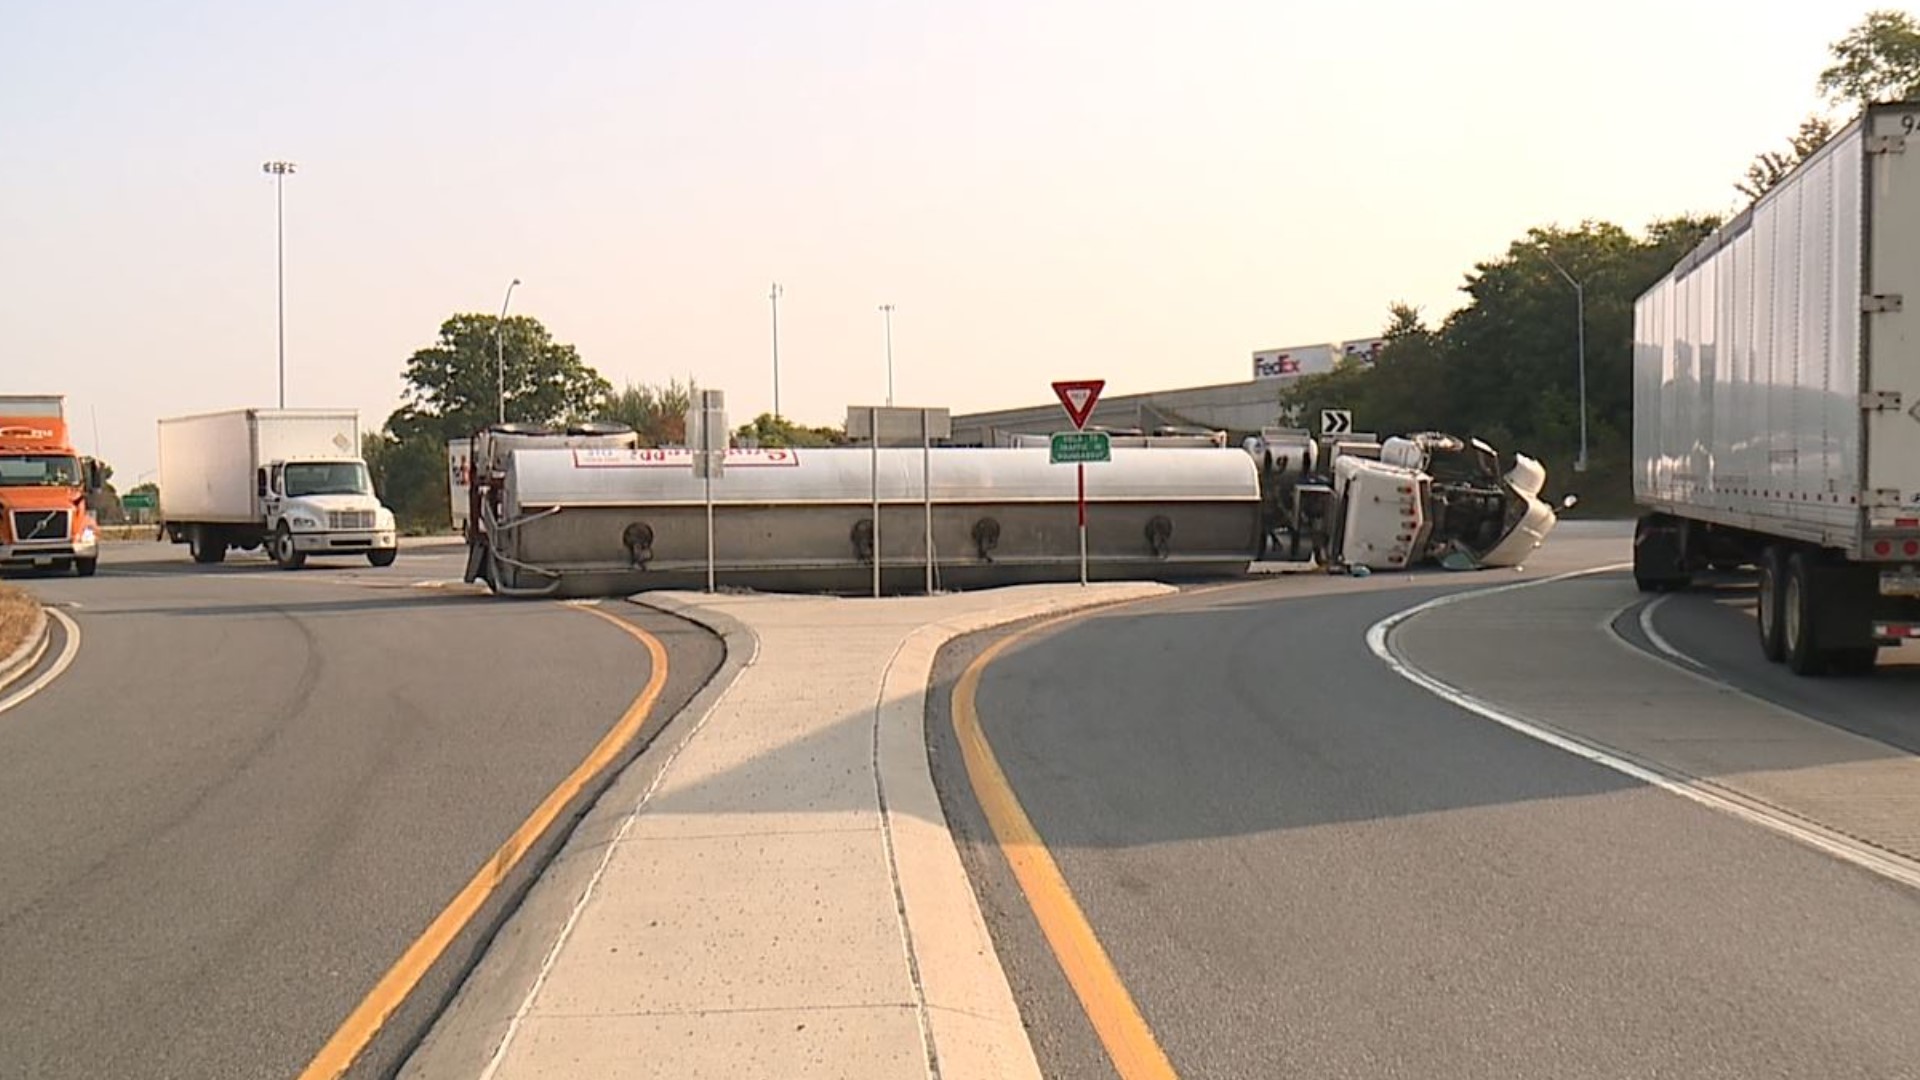 A truck hauling gasoline crashed Friday morning, tying up traffic to the Wilkes-Barre/Scranton International Airport and to Interstate 81.